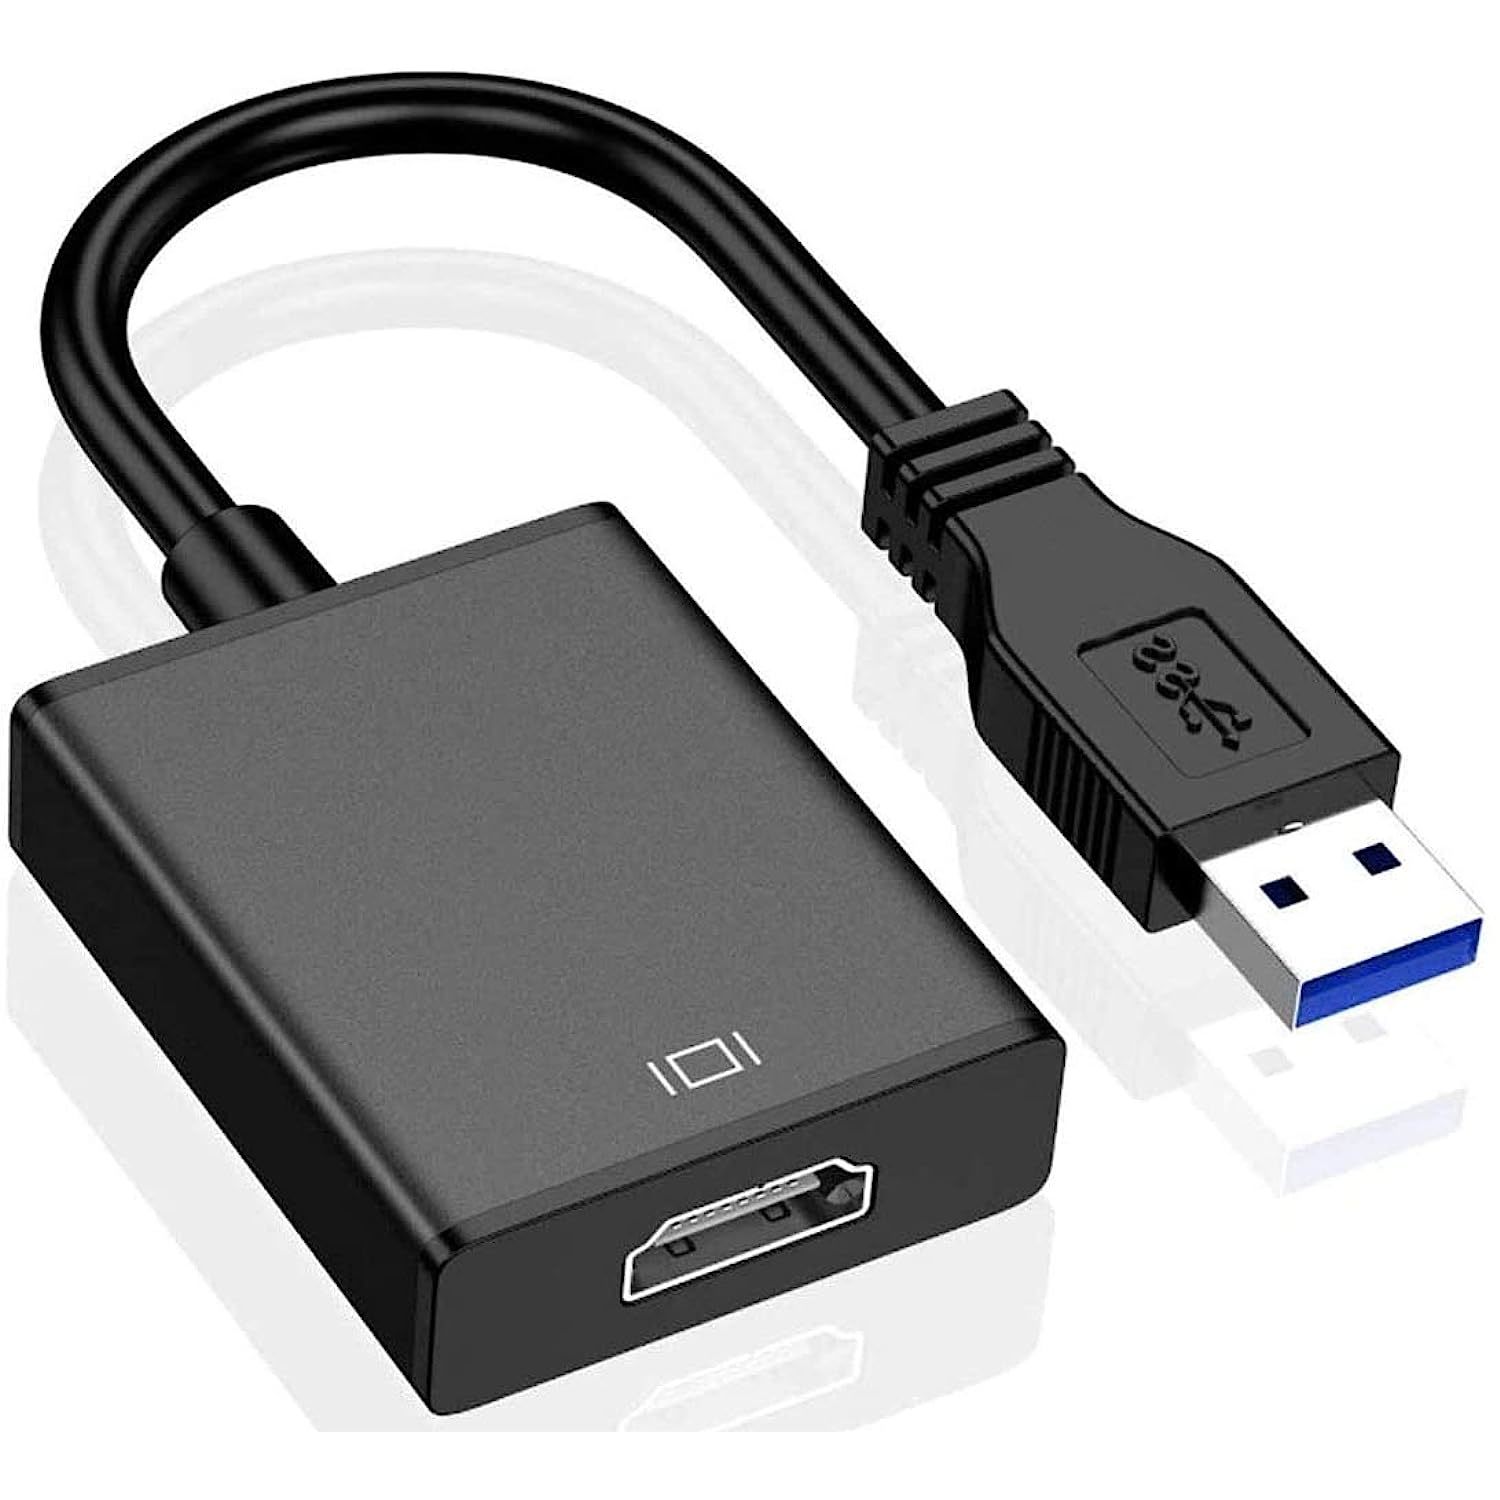 Primary image for Usb To Hdmi Adapter, Usb 3.0/2.0 To Hdmi 1080P Video Graphics Cable Converter Wi